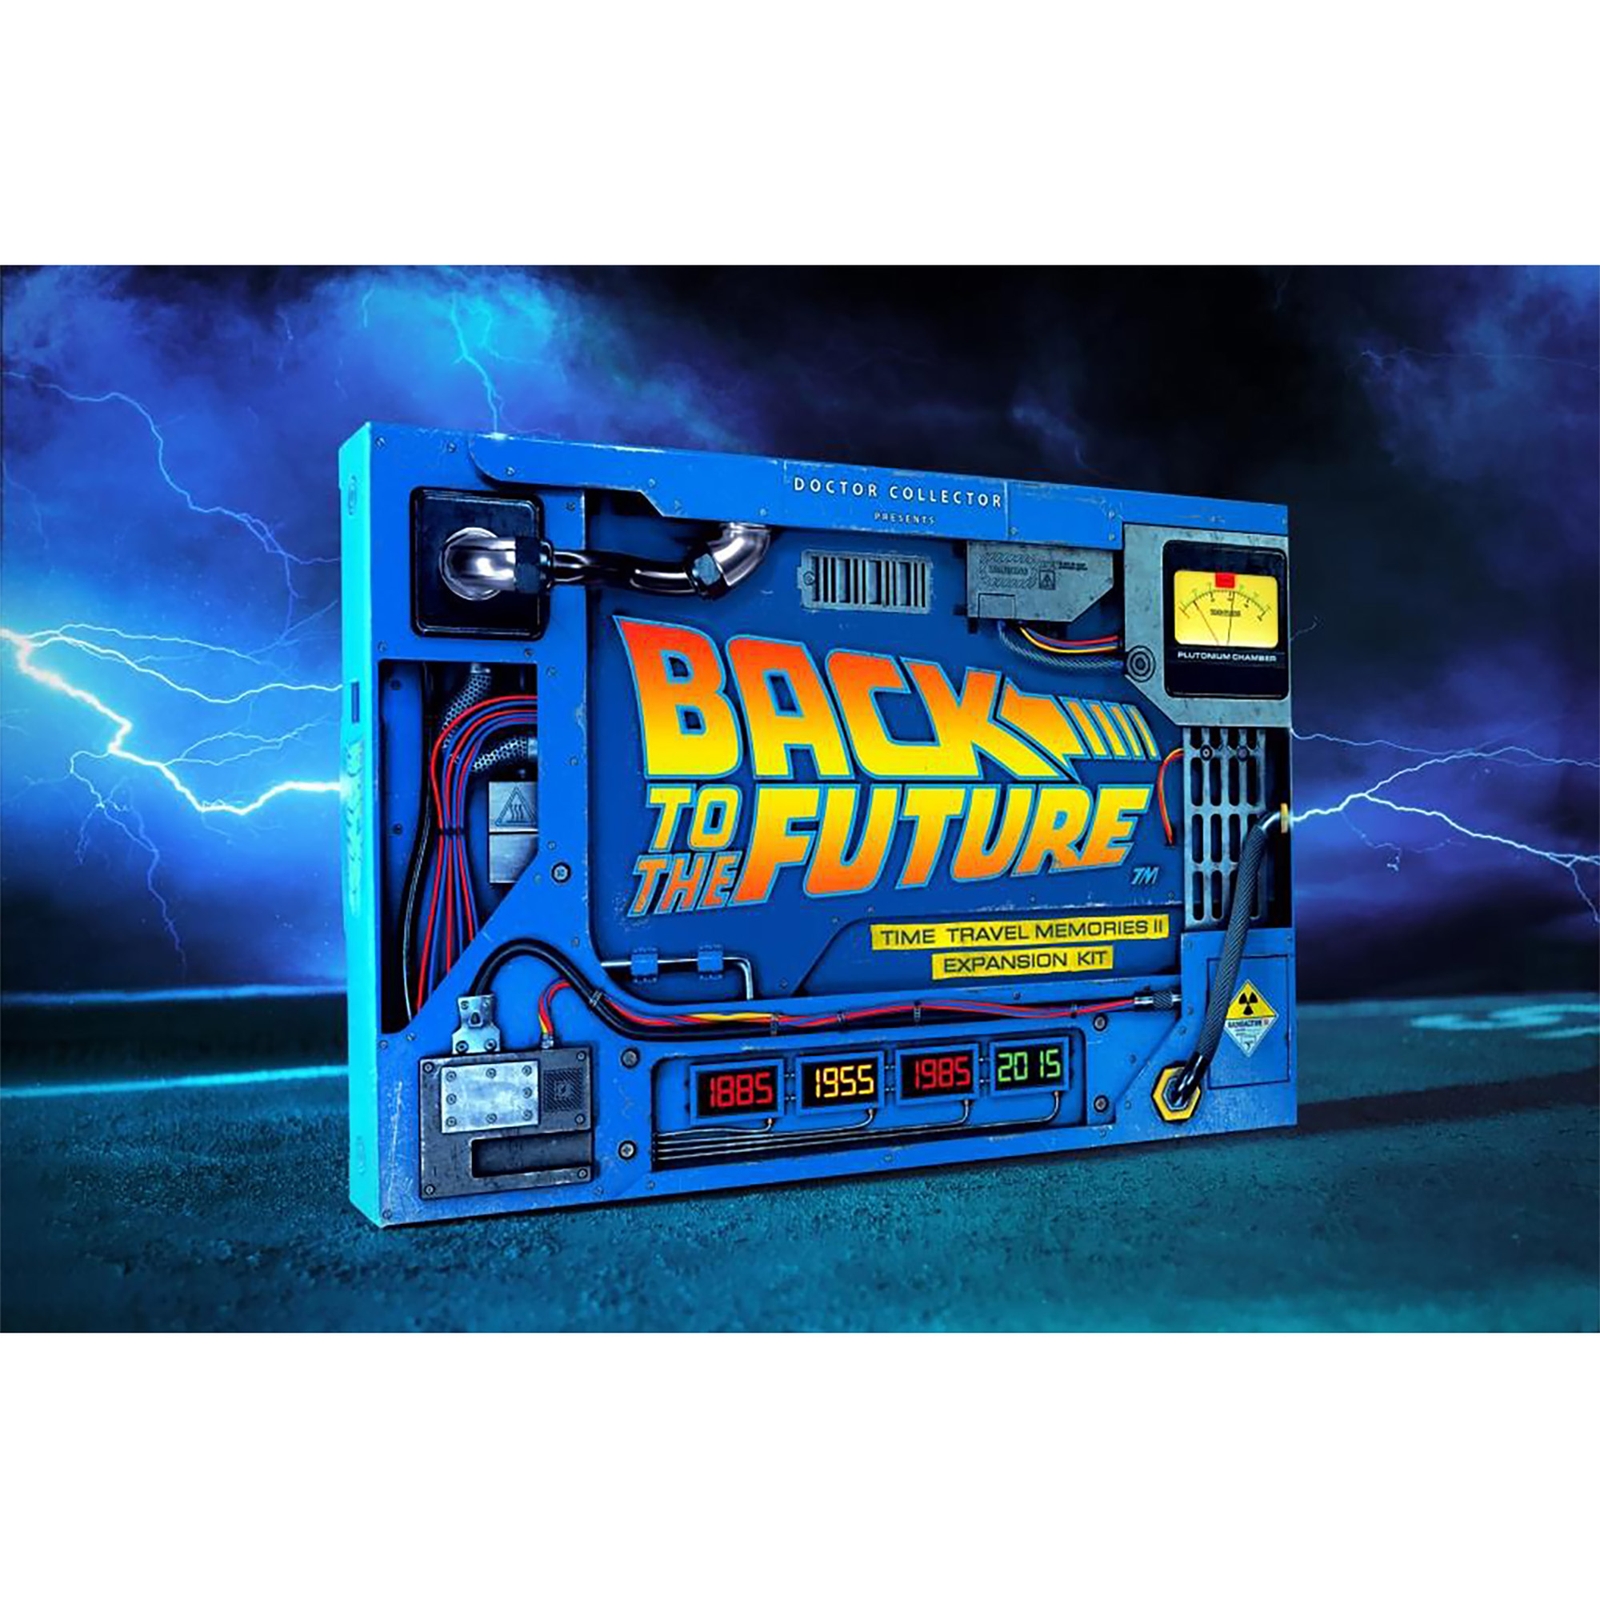 Image of Doctor Collector Back to the Future Time Travel Memories II Expansion Kit